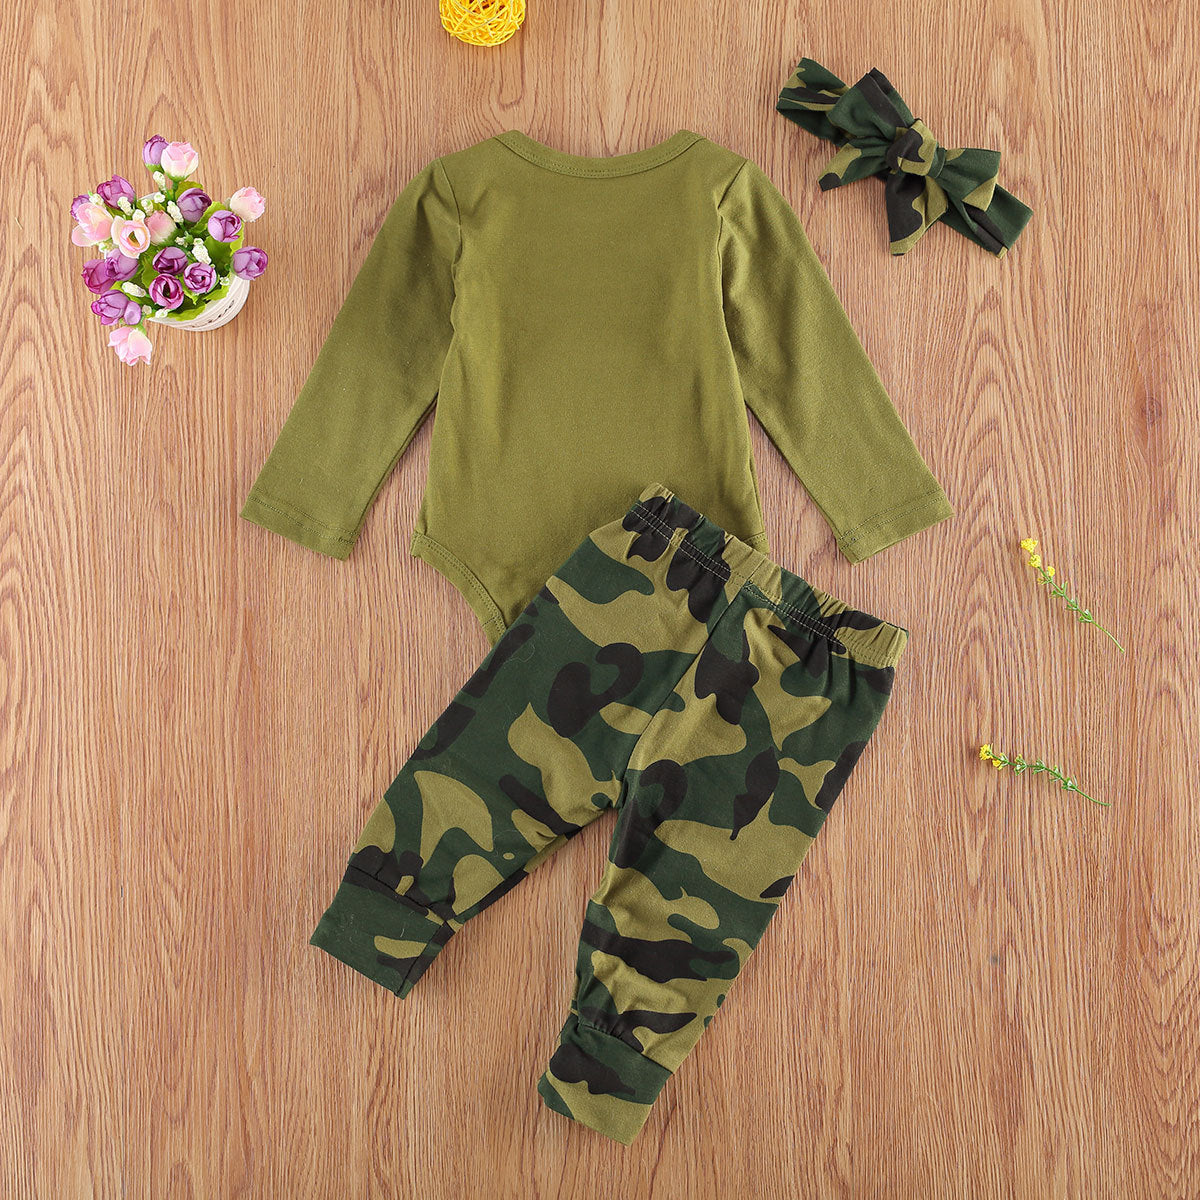 Camouflage Printed clothing Set for babies